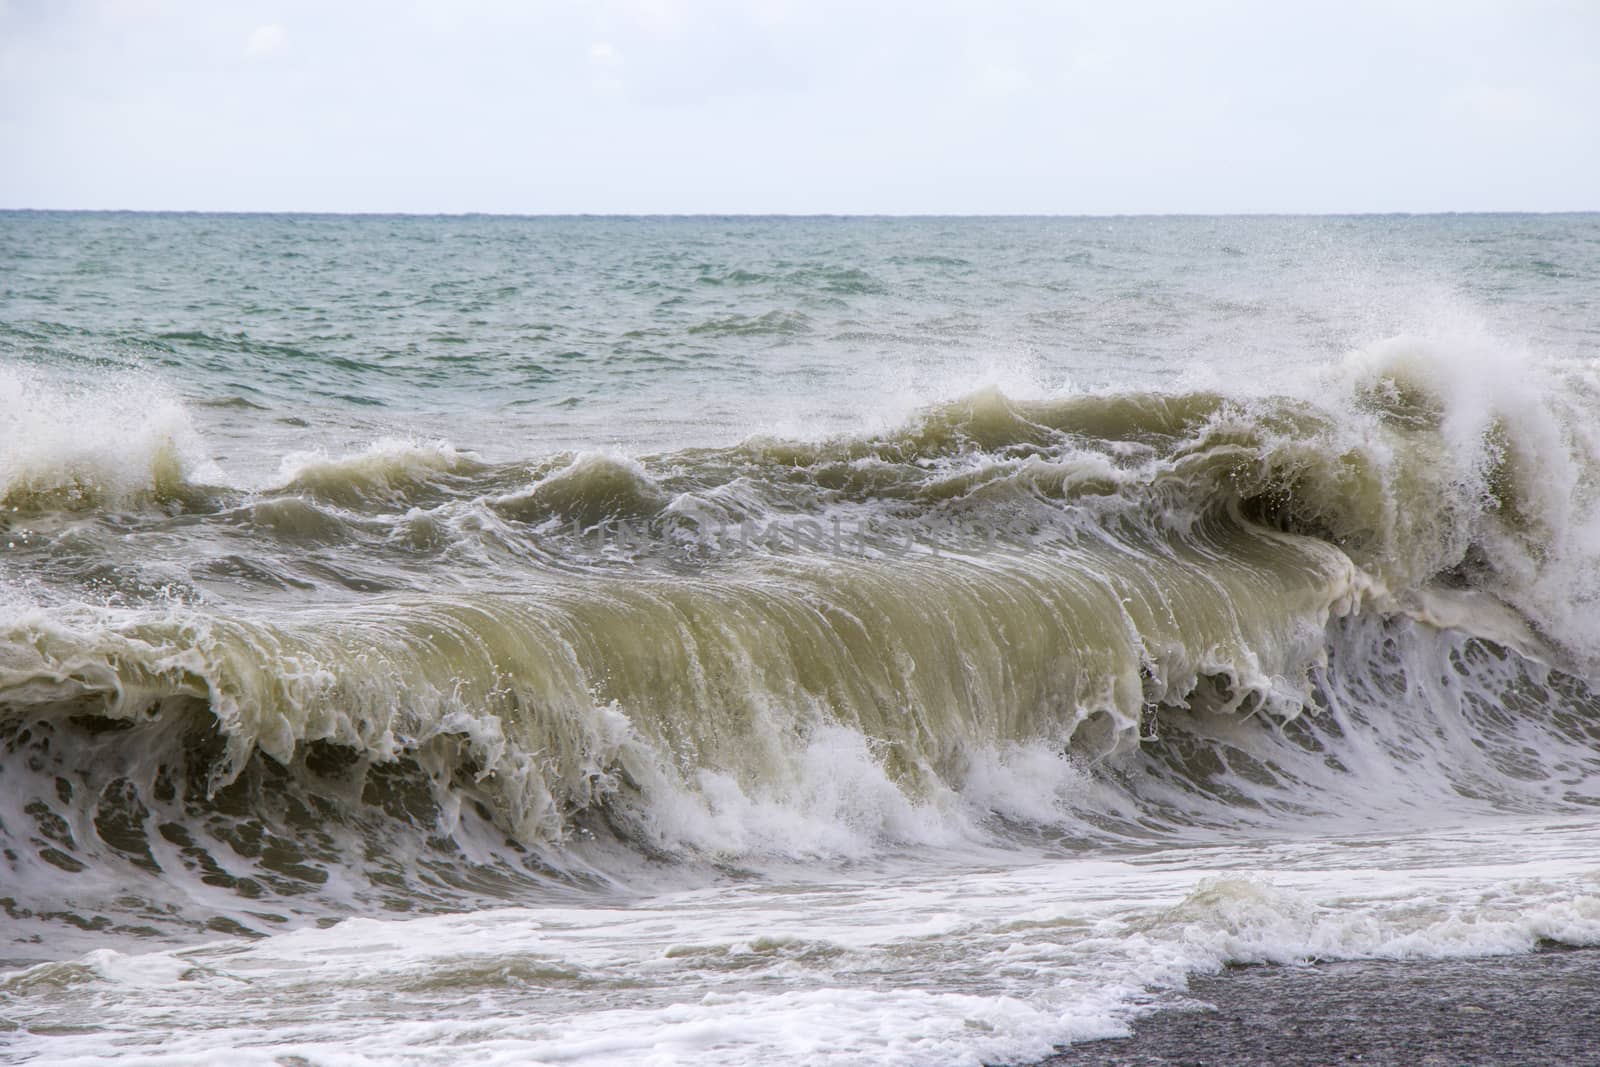 Stormy weather, waves and splashes in Batumi, Georgia. Stormy Black sea. Water background.